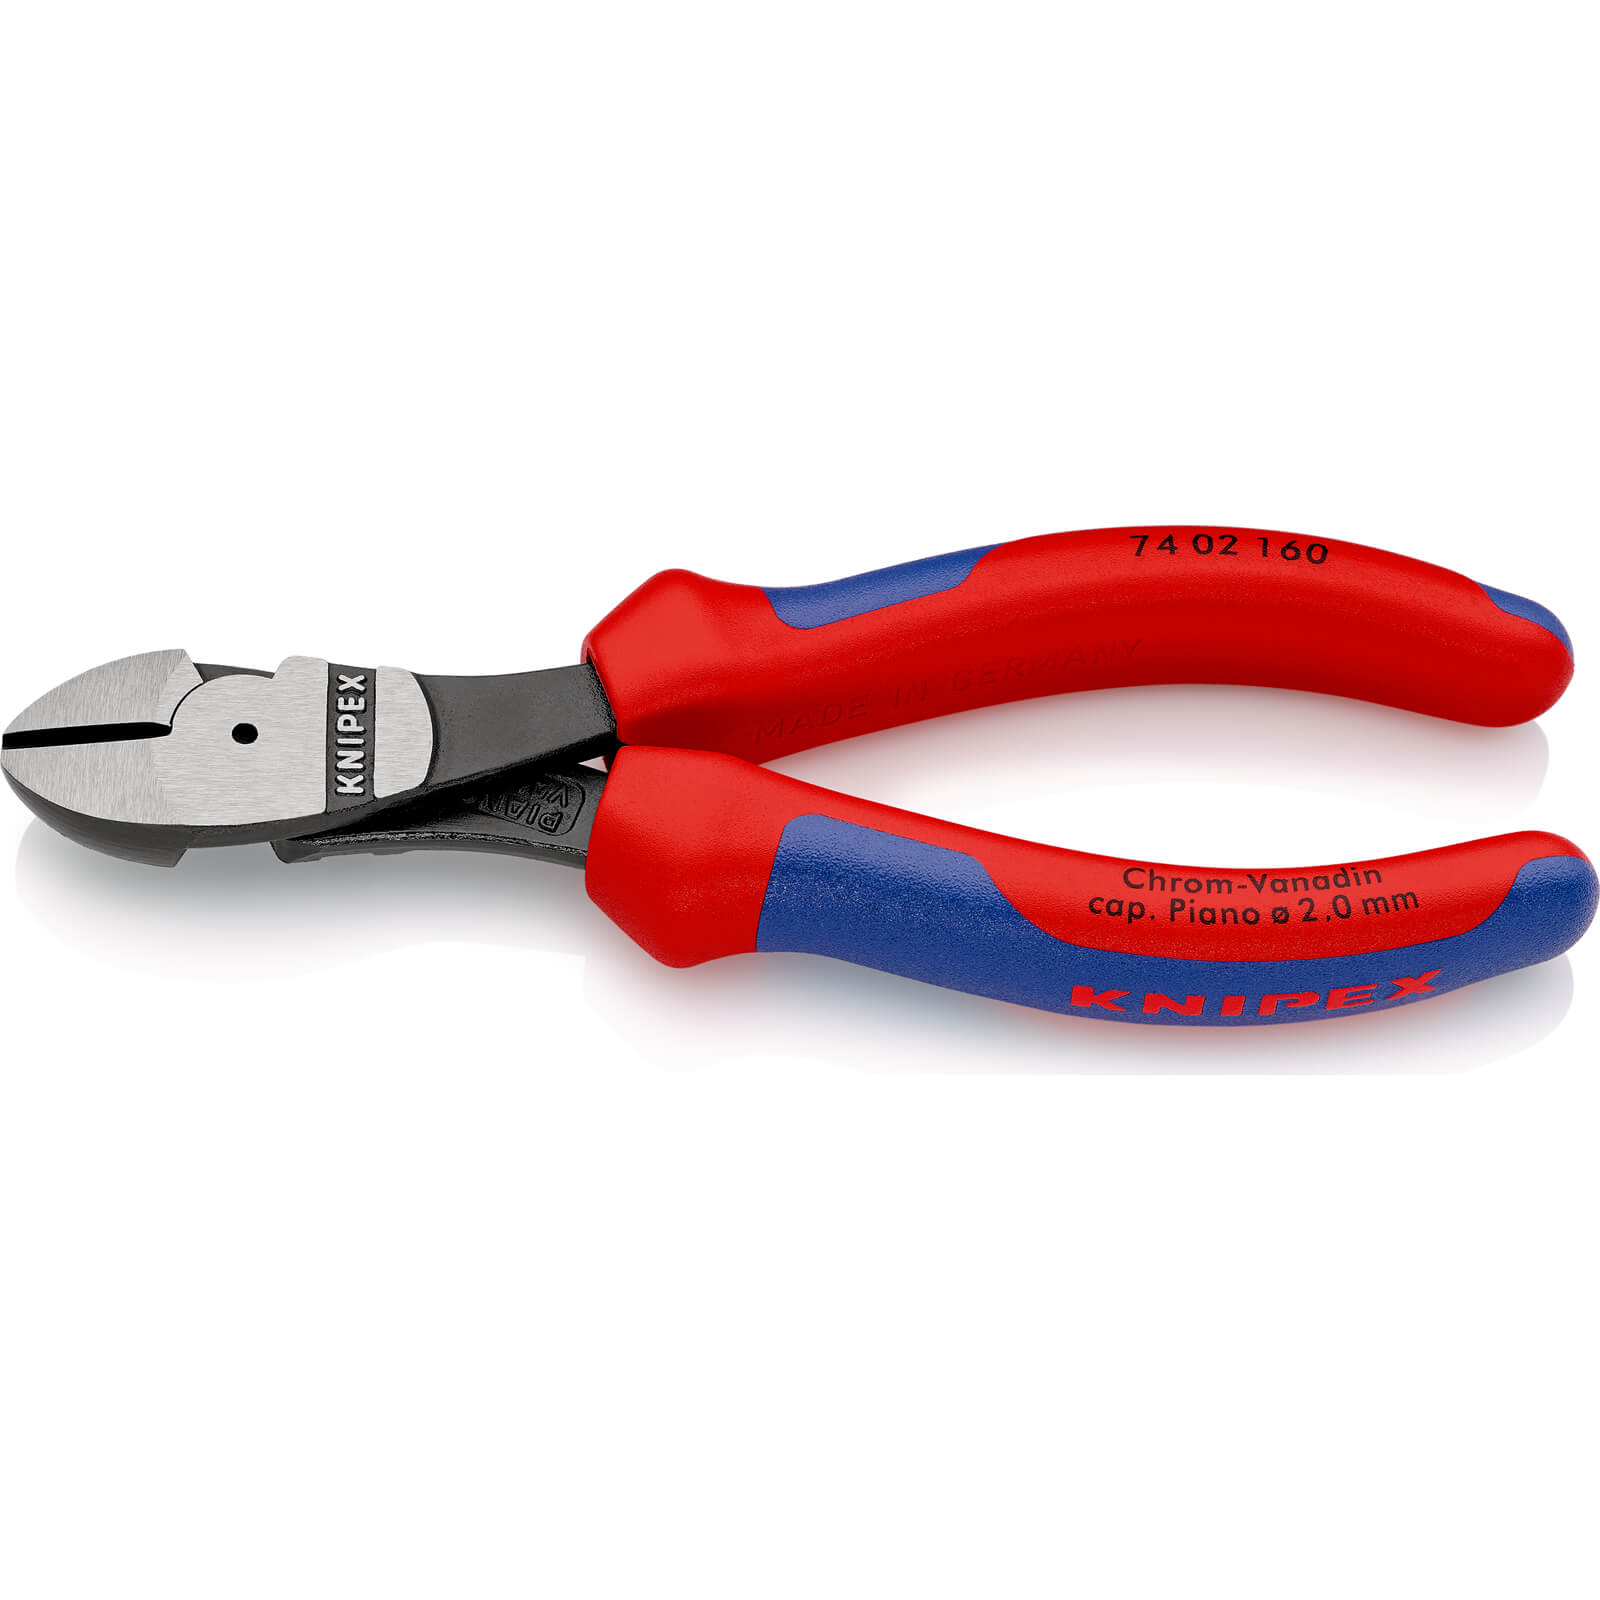 Image of Knipex 74 02 Diagonal Cutting Pliers 160mm